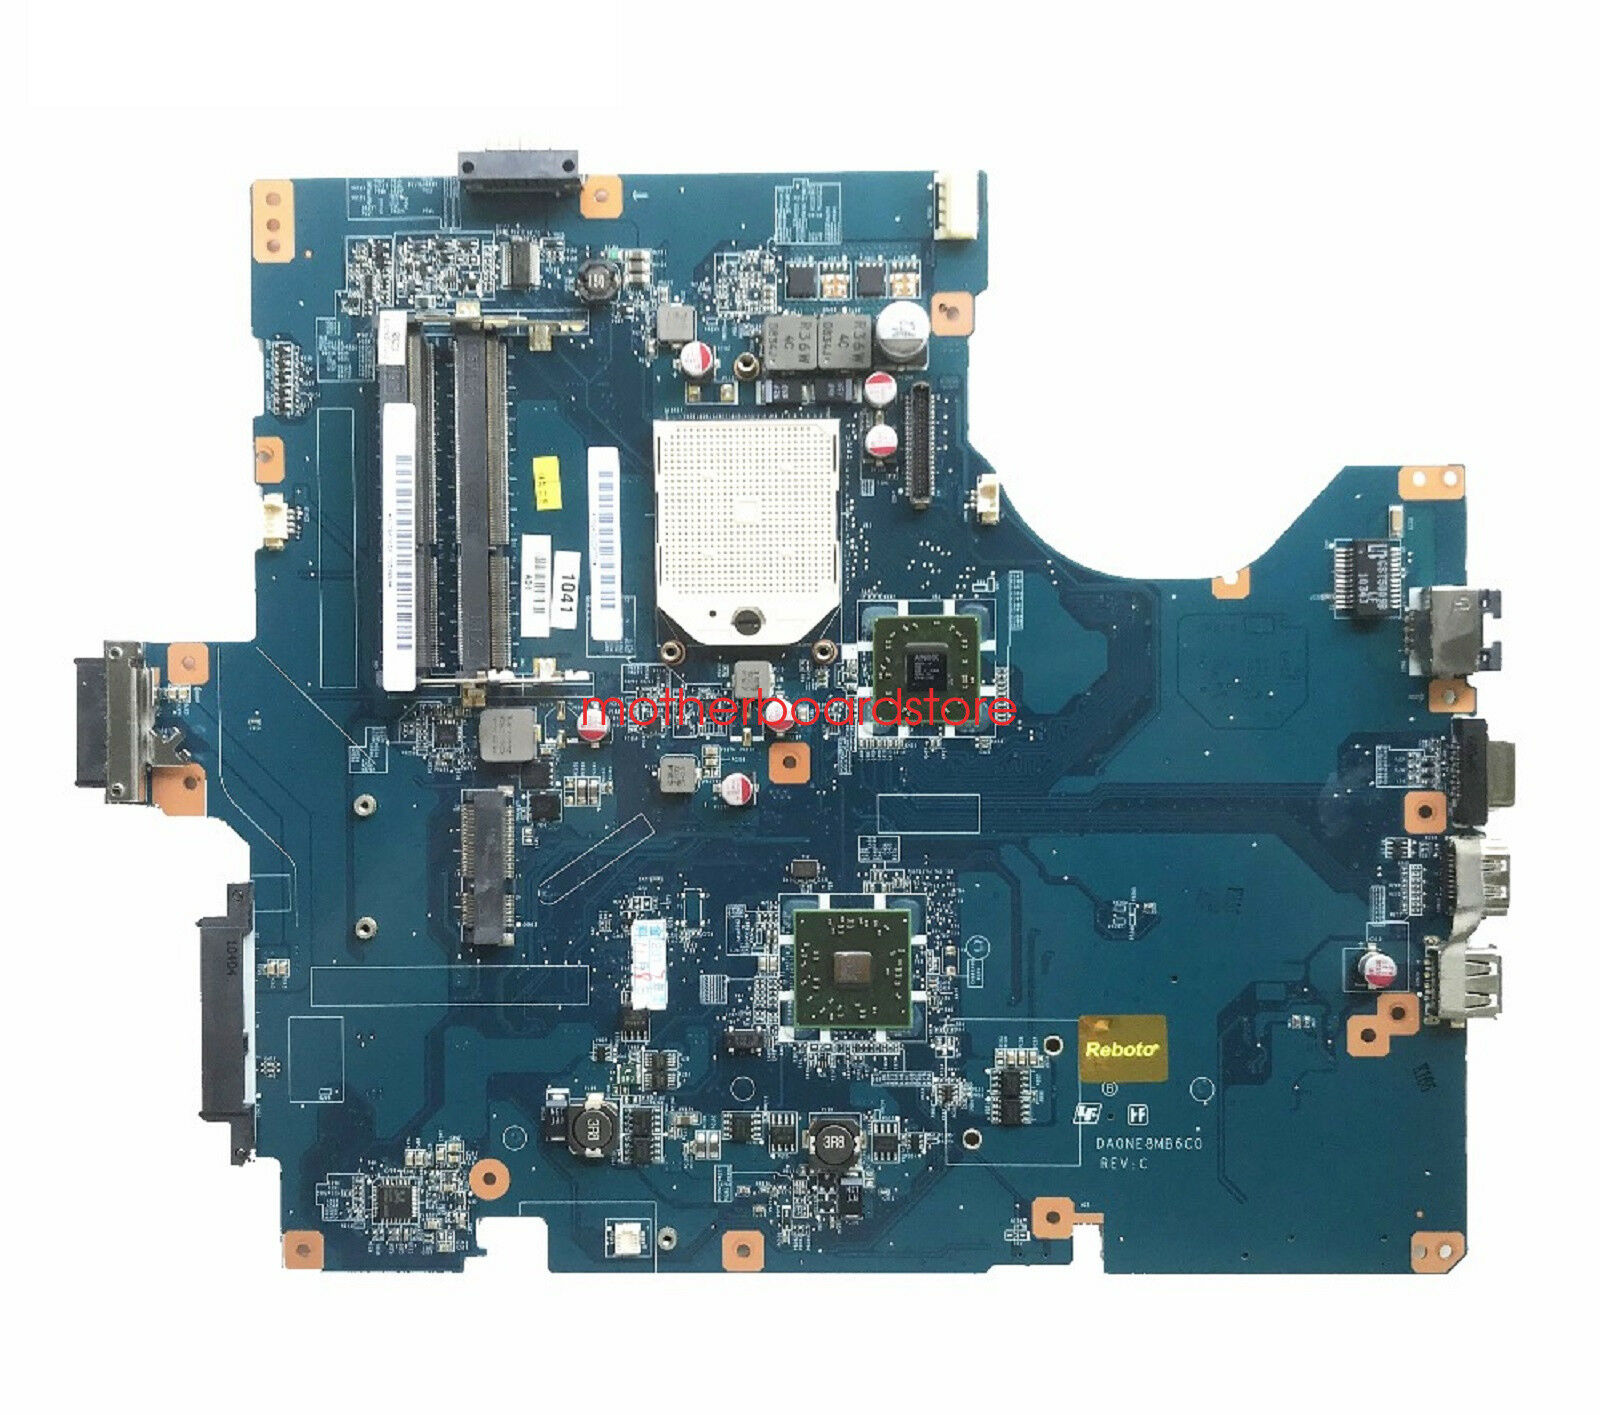 Sony VPCEF PCG-71511M AMD Motherboard DA0NE8MB6C0 A1784745A Tested Brand: Sony Number of Memory Slots: 2 M